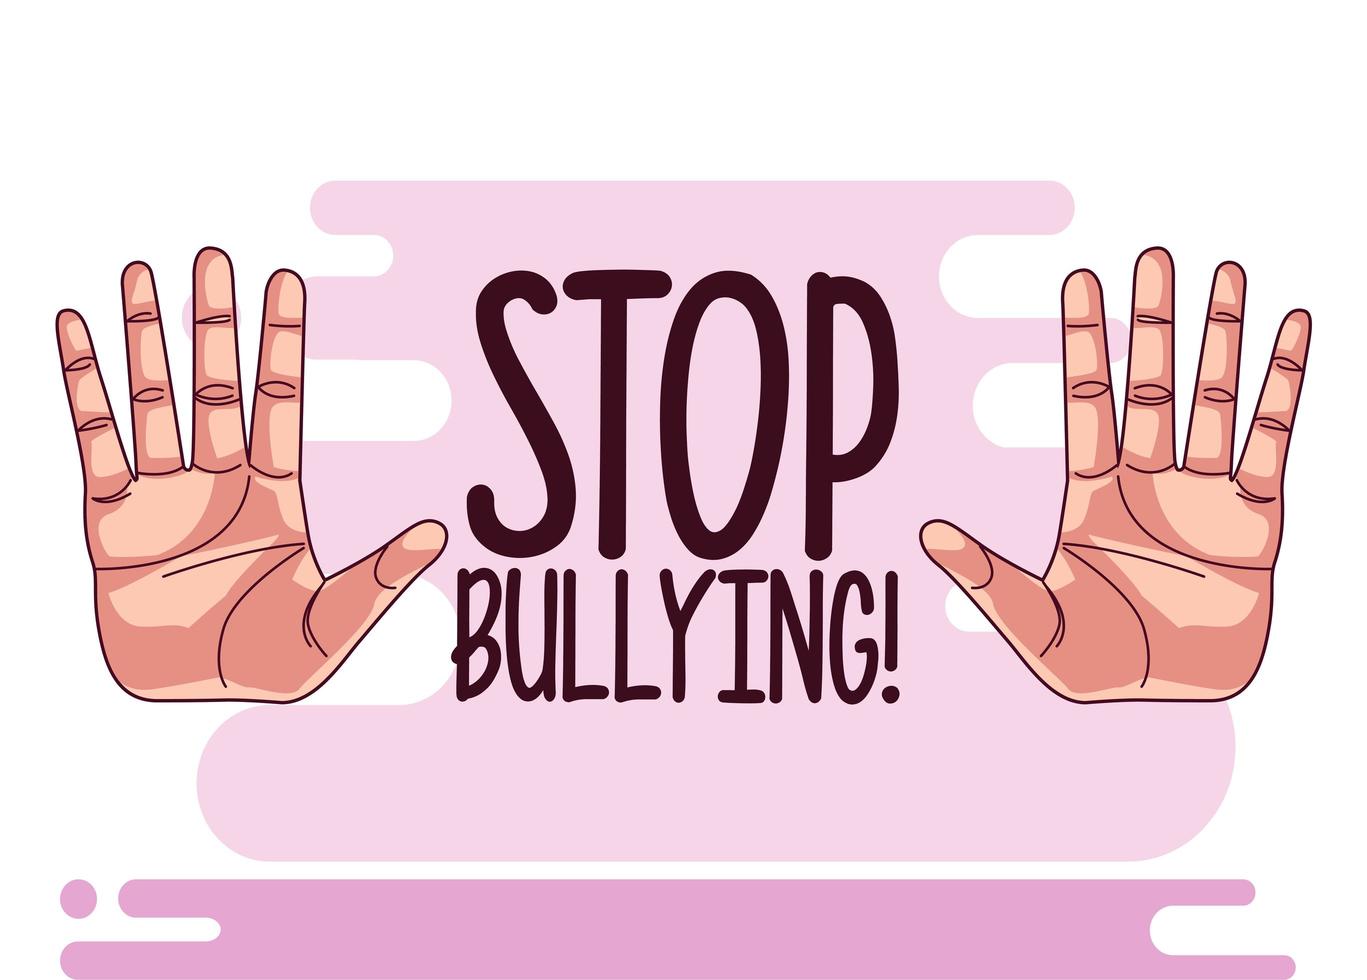 stop bullying lettering and hands stoping vector